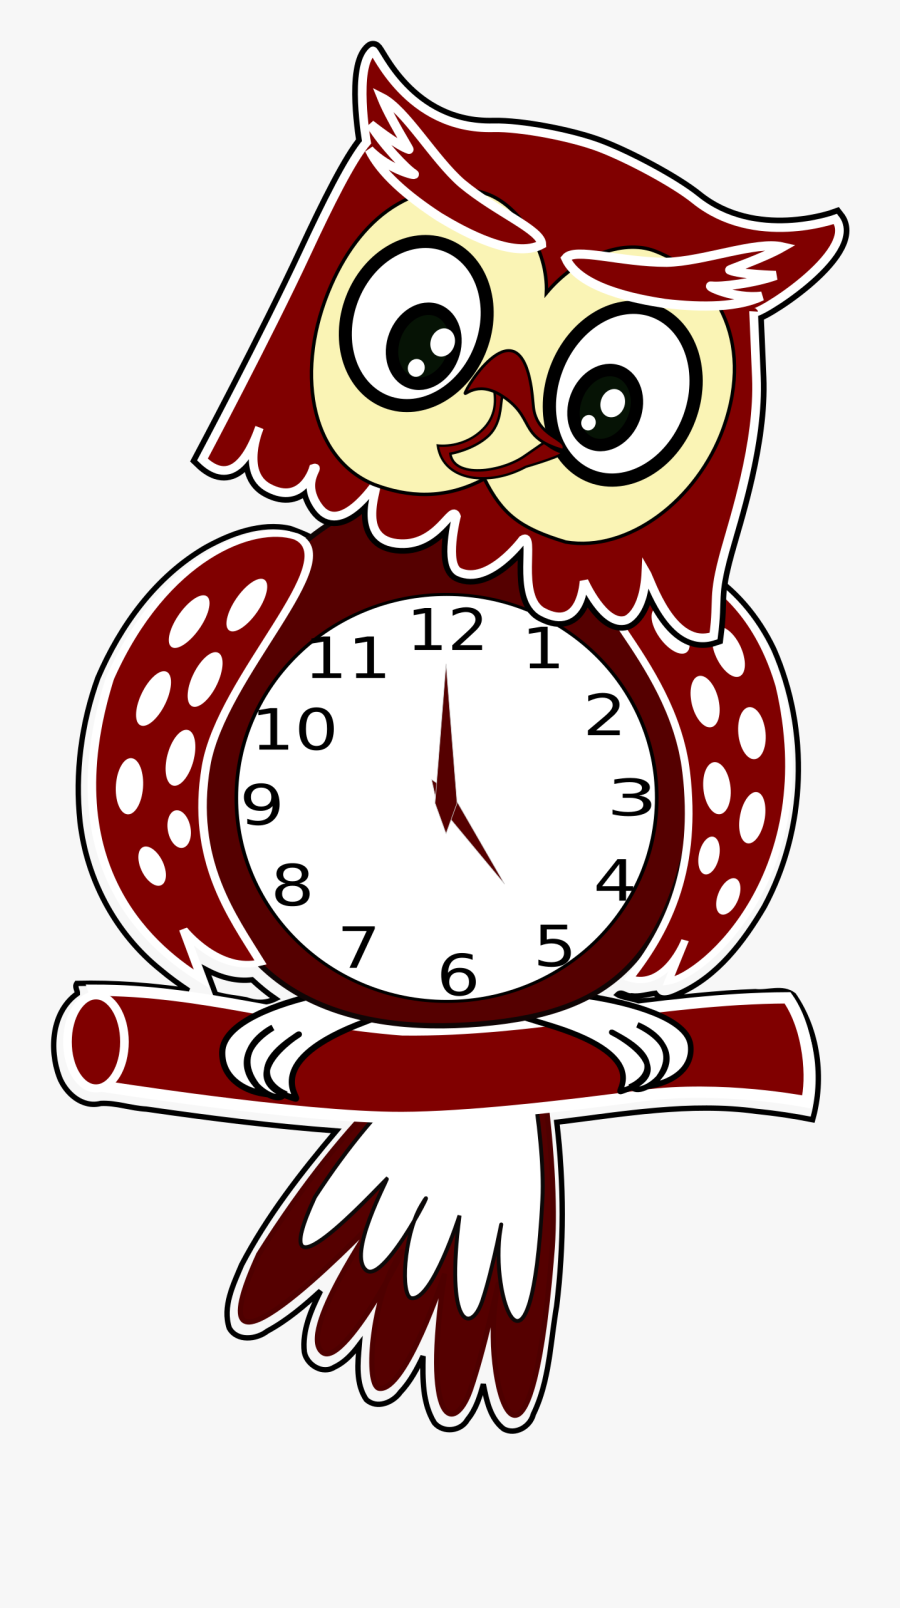 Animated Owl Clock - Lesson Plan Template On Telling Time, Transparent Clipart